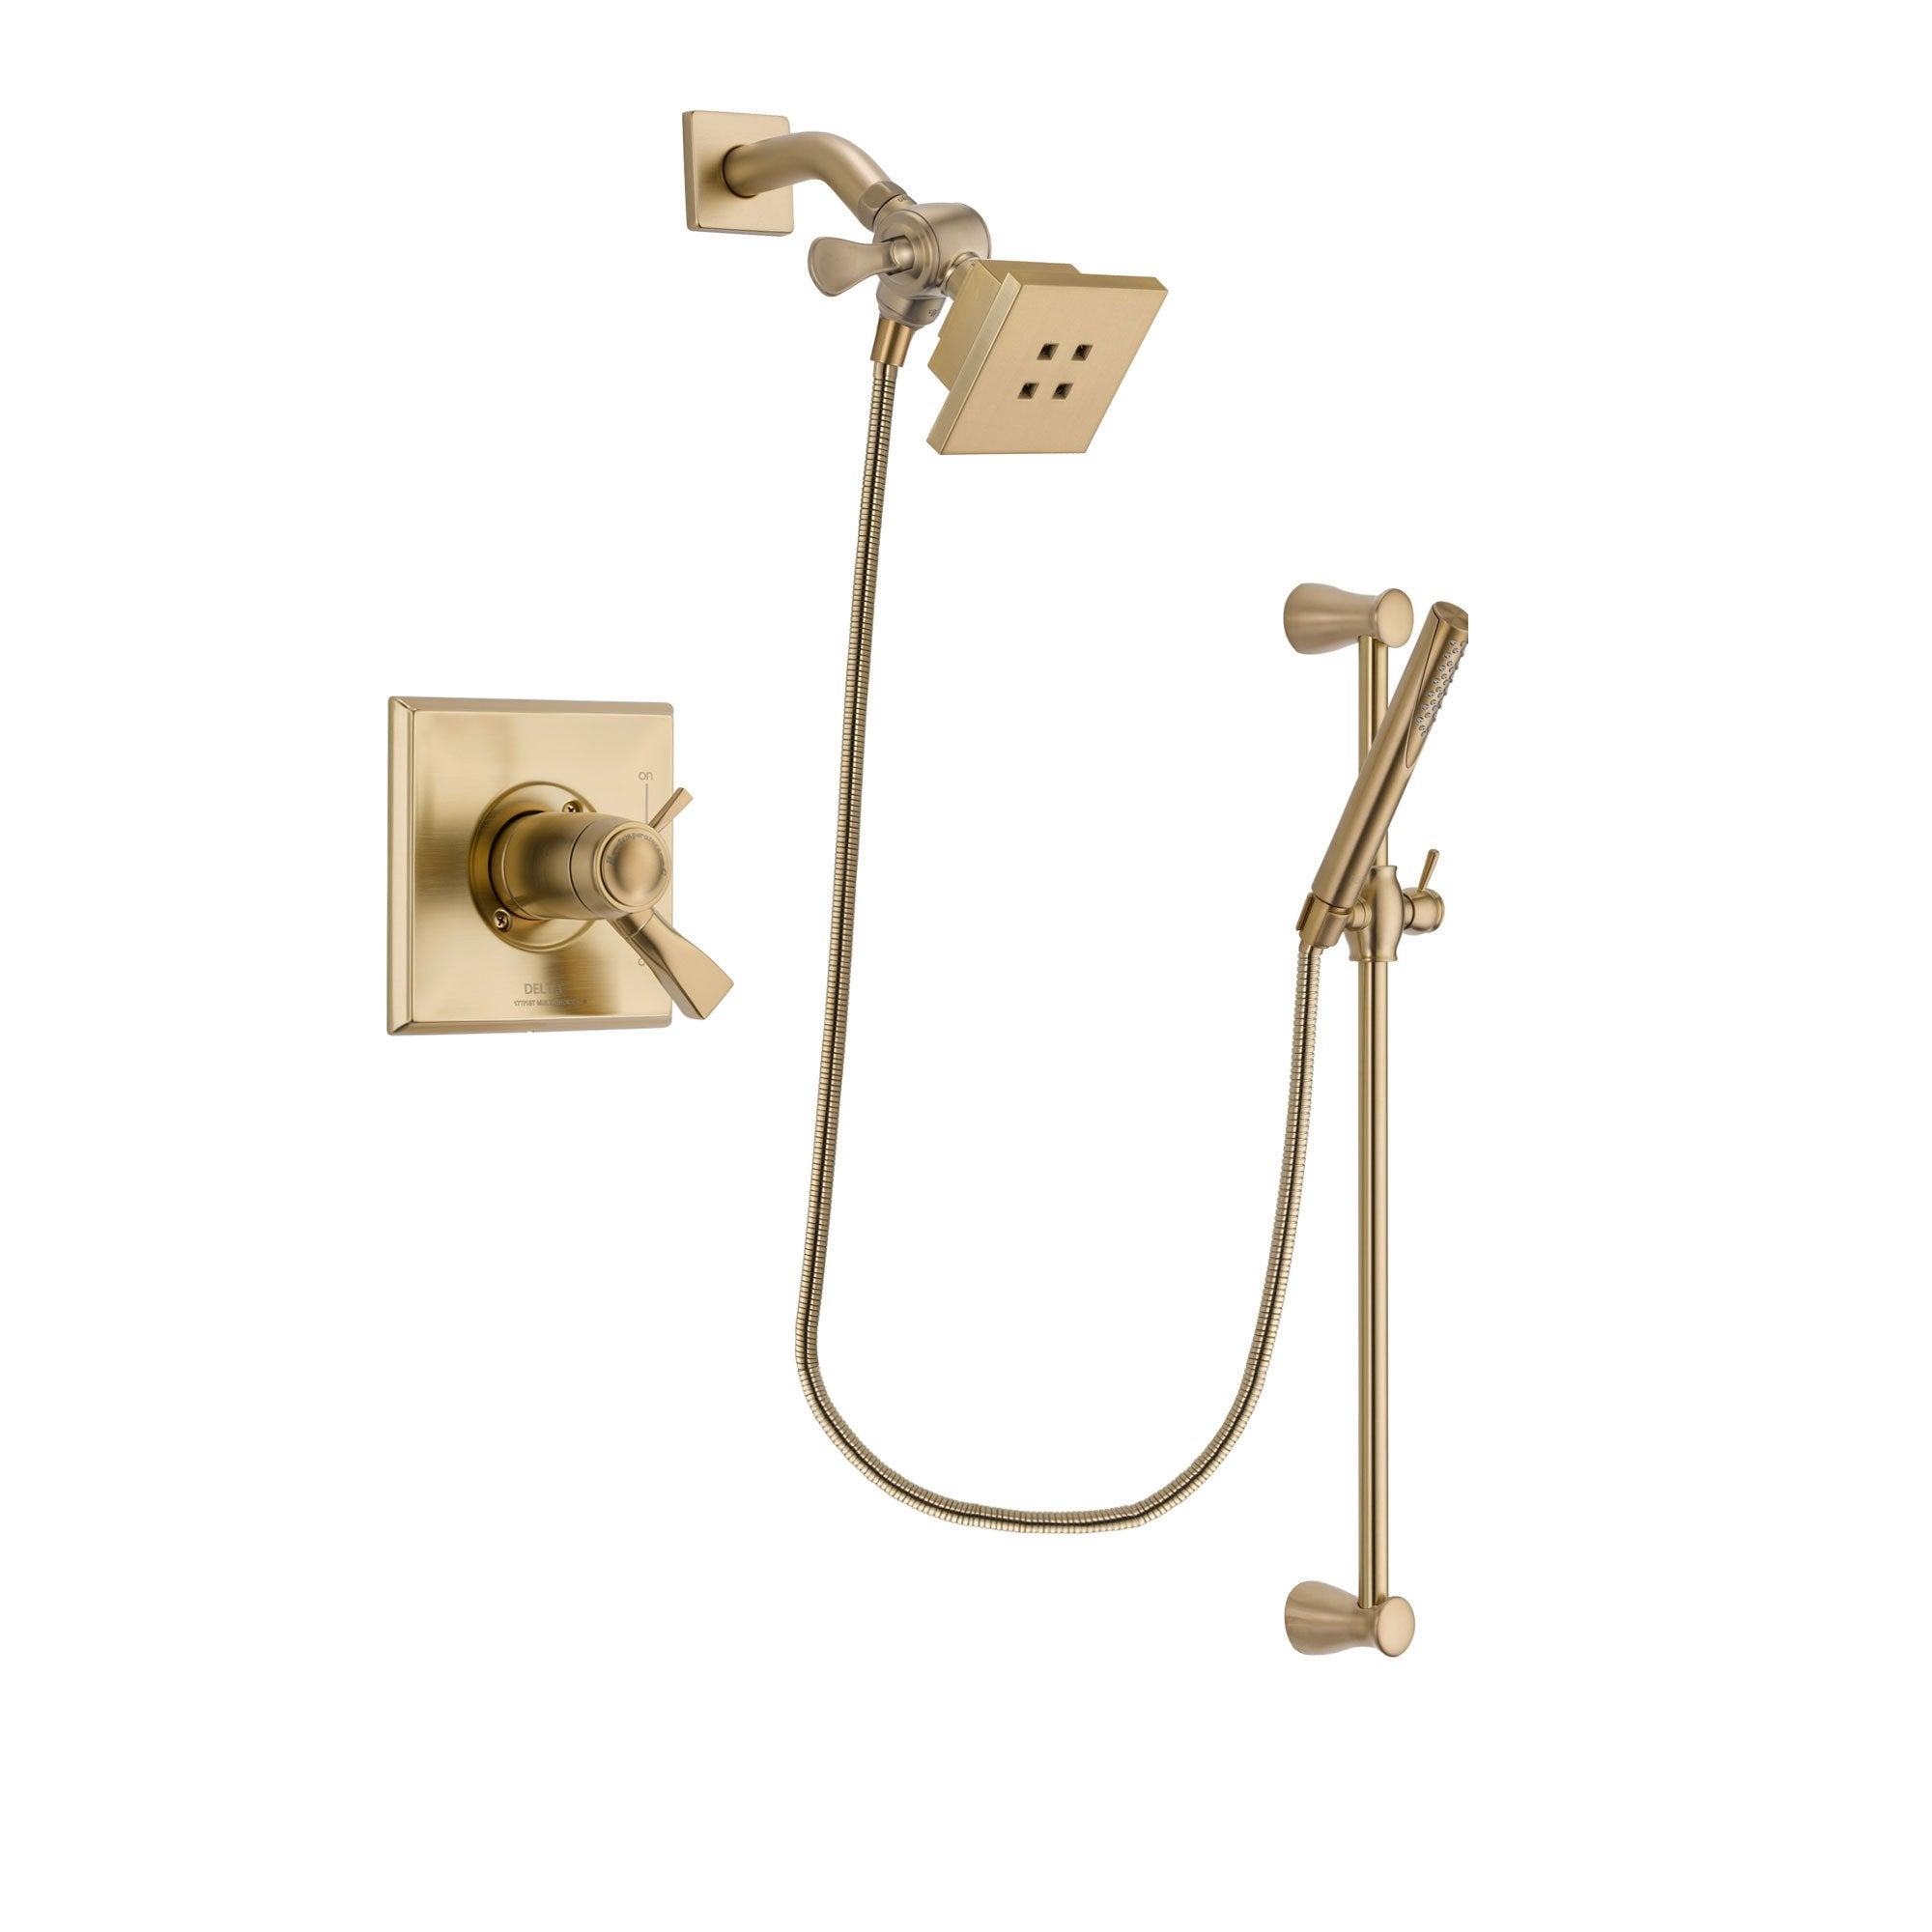 Delta Dryden Champagne Bronze Finish Thermostatic Shower Faucet System Package with Square Showerhead and Modern Handheld Shower with Slide Bar Includes Rough-in Valve DSP3946V